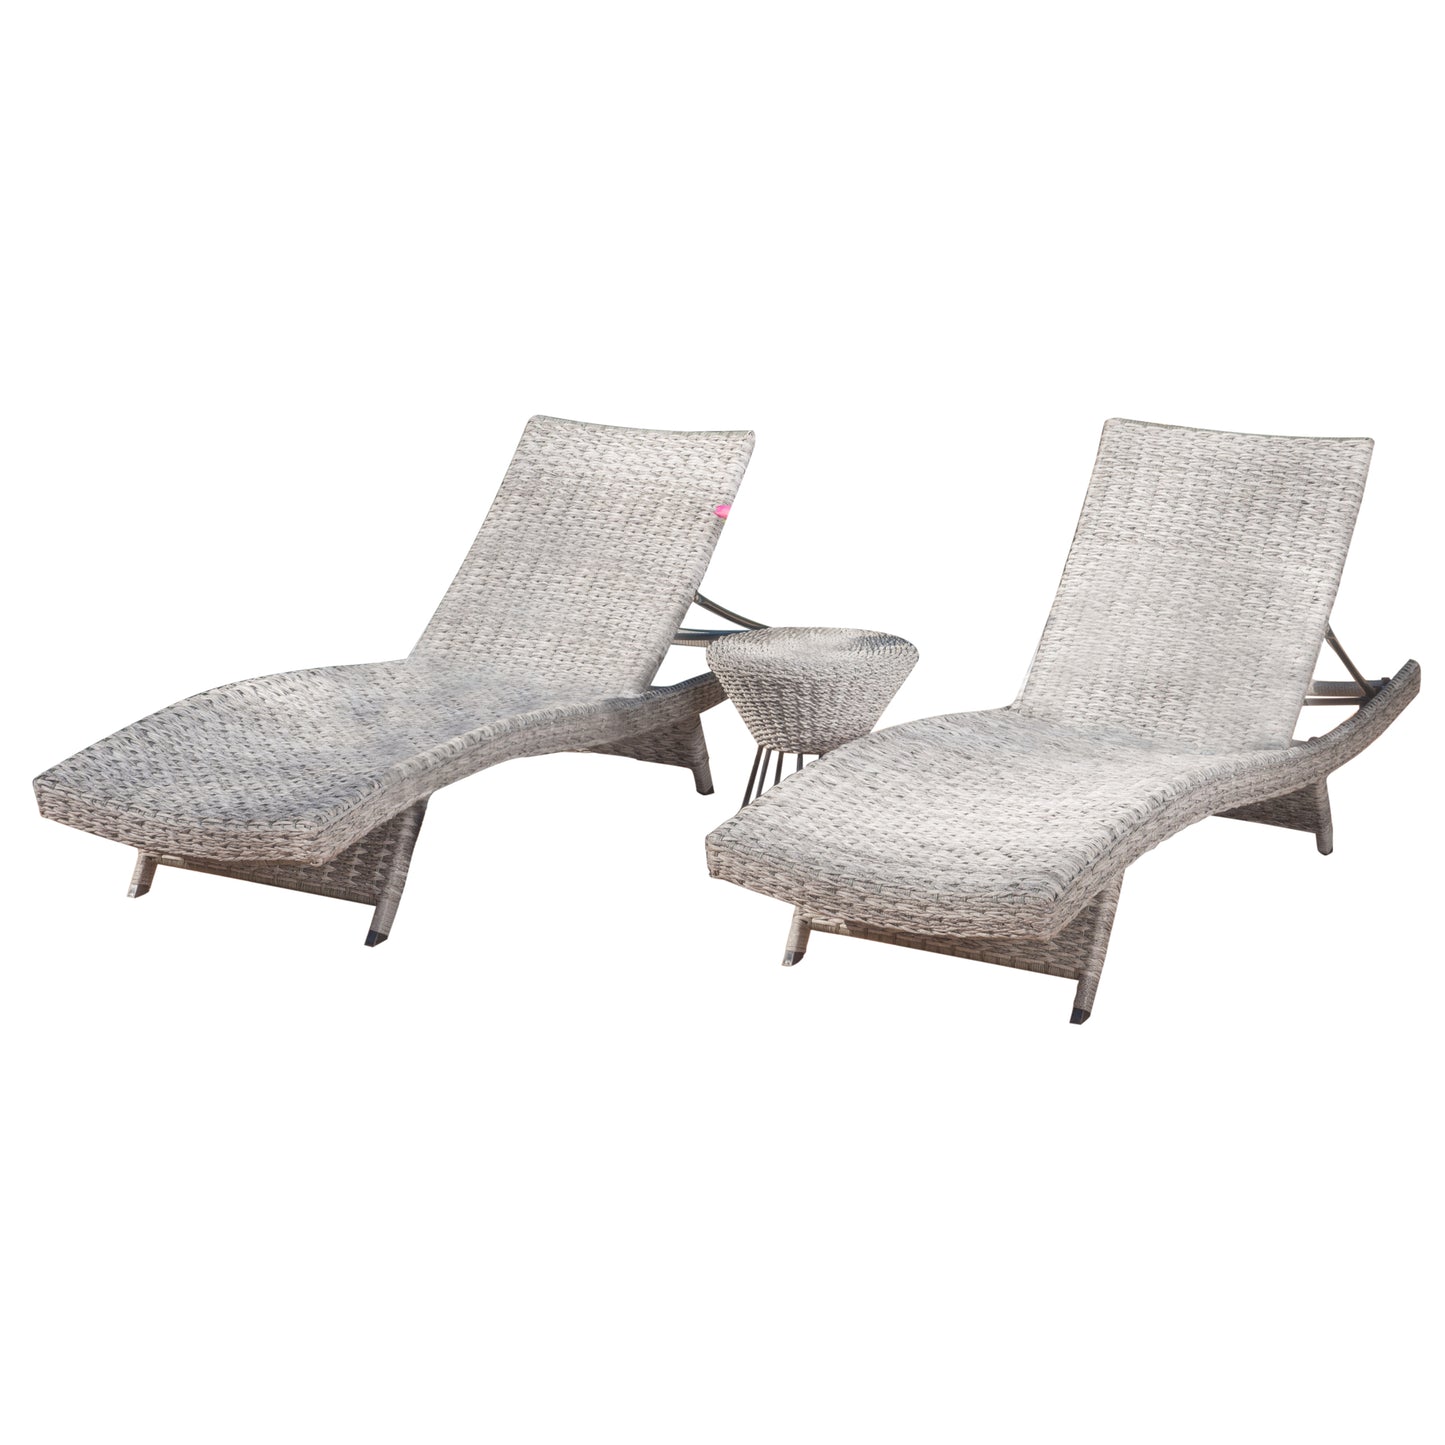 Crystal Outdoor Grey Wicker Chaise Lounge (Set of 2) with Grey Wicker Table